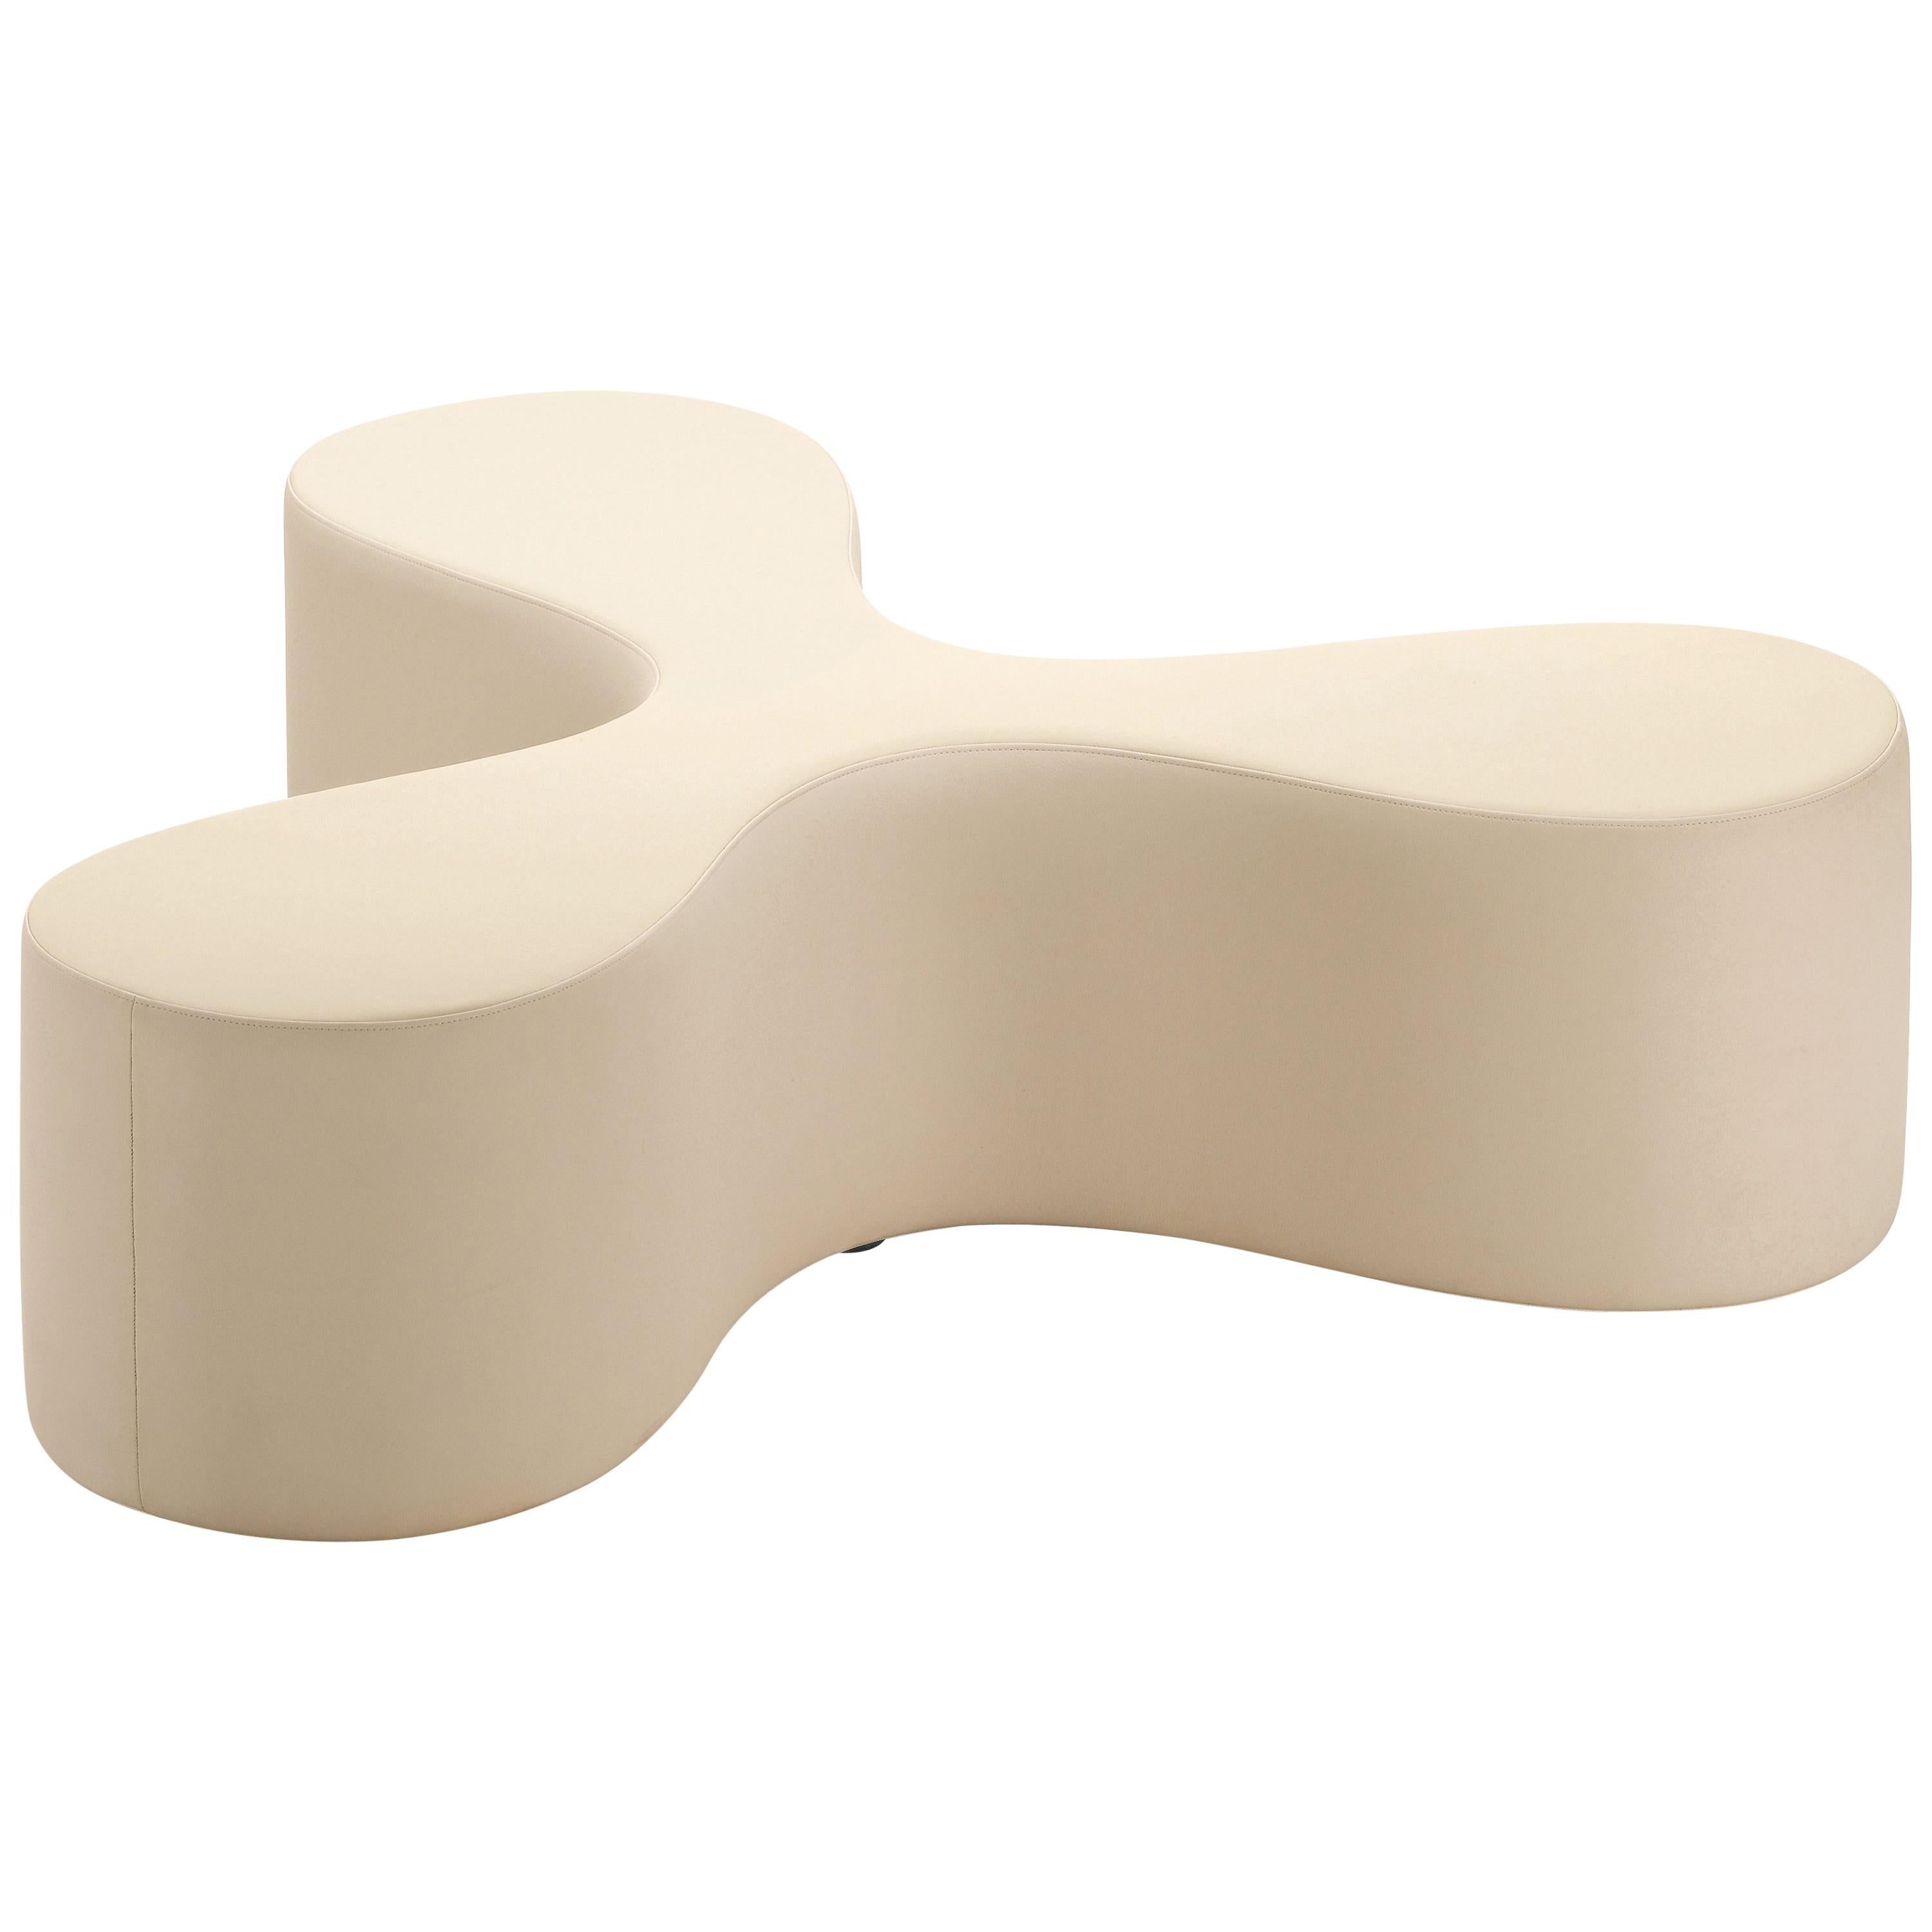 Vitra Flower Bench in Almond by SANAA For Sale